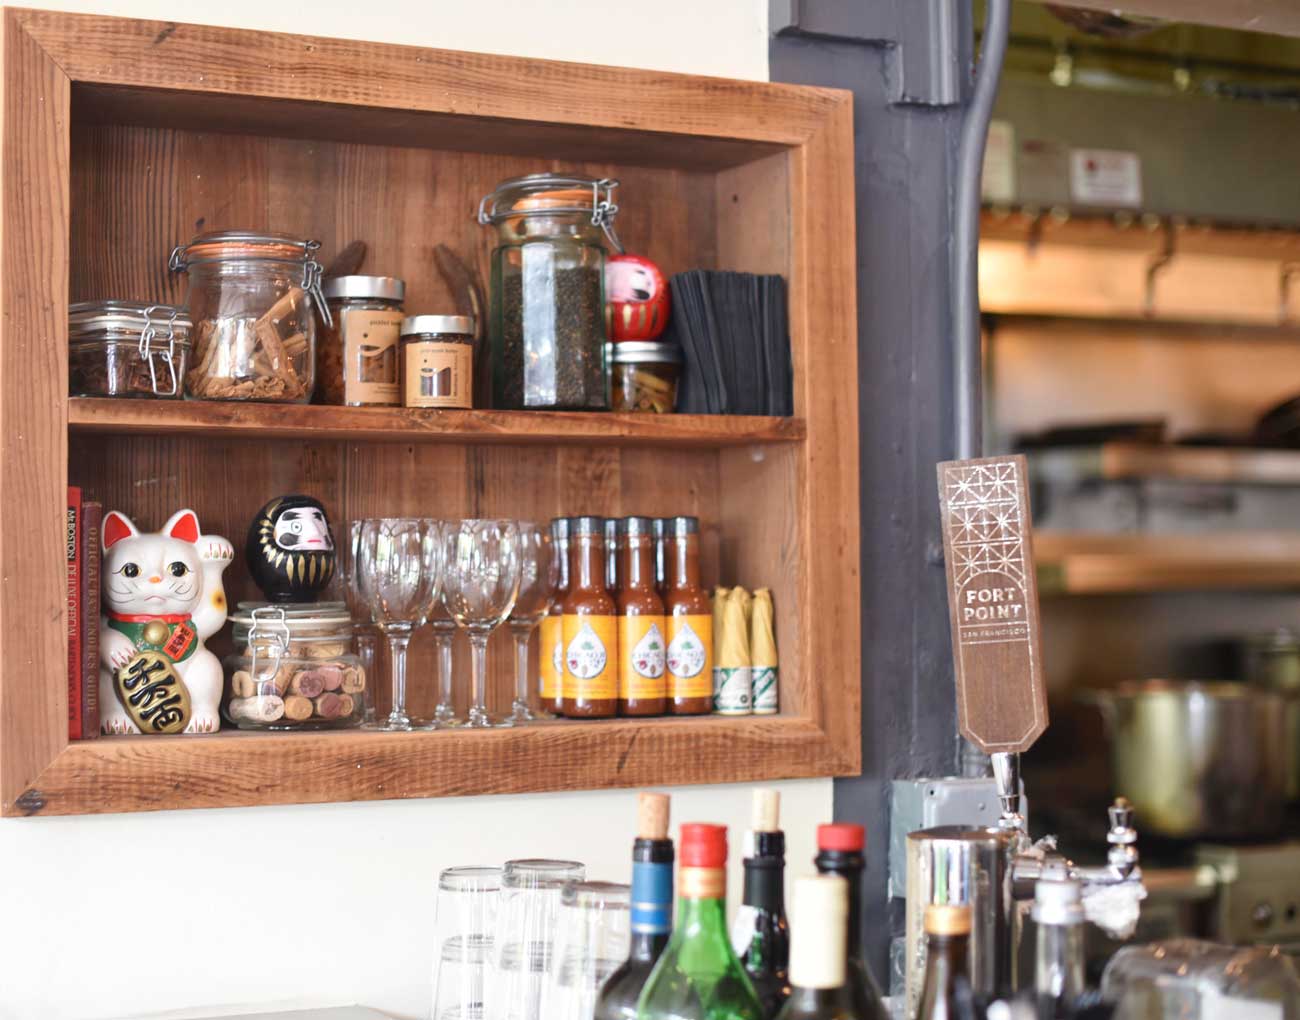 Knick-knacks, gifts from Bernal Heights neighbors and patrons, adorn the shelves at Hillside Supper Club.